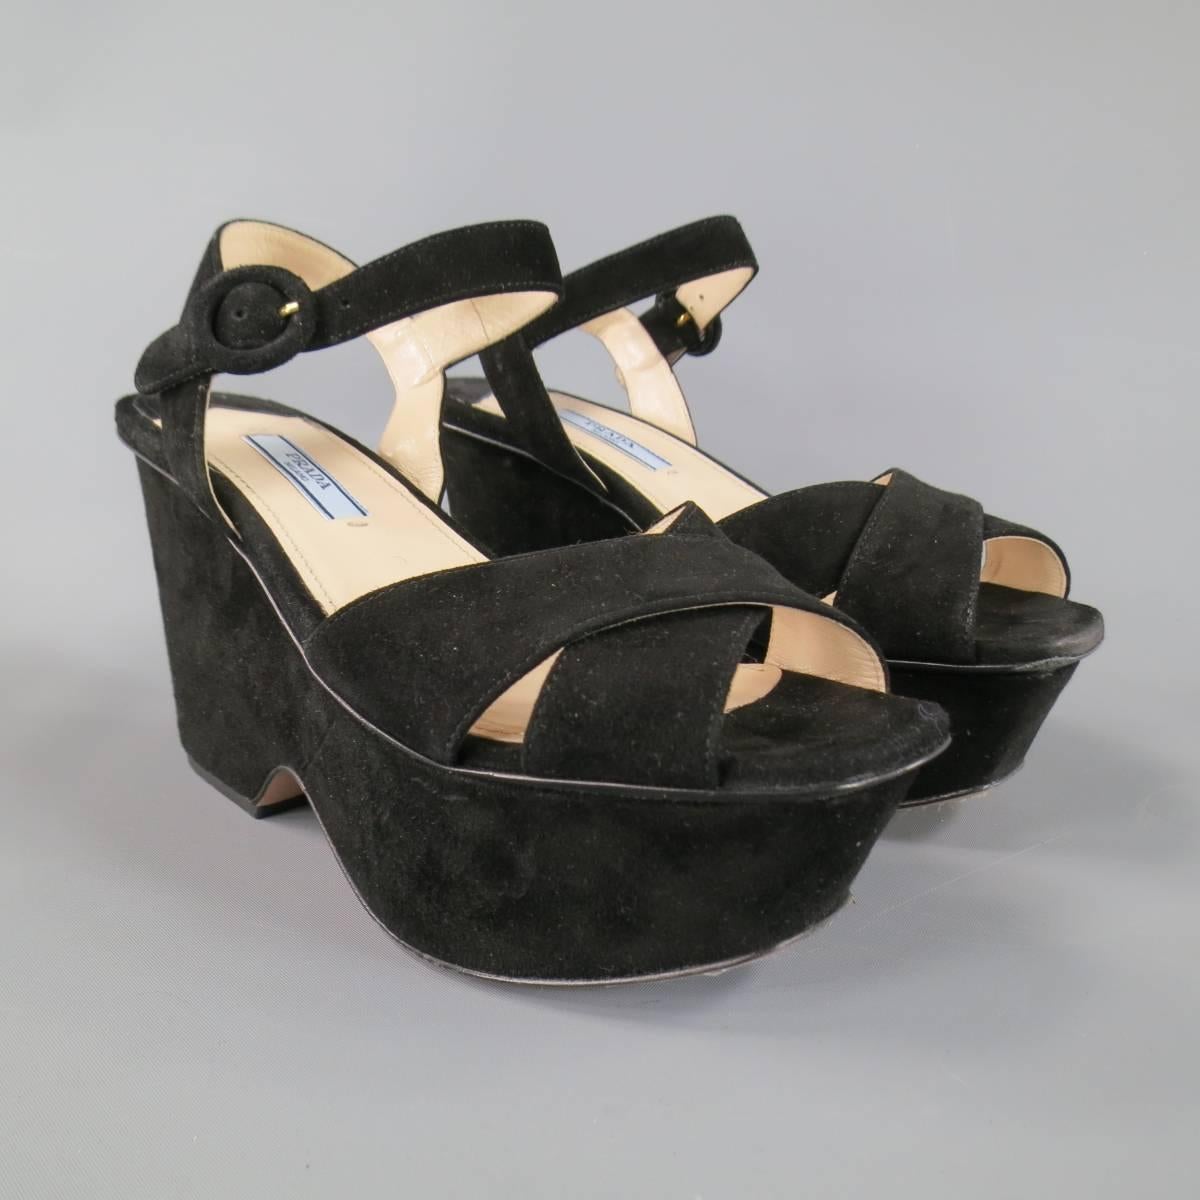 Retro inspired PRADA sandals in a plush black suede featuring a crossed peep toe strap, ankle harness, and chunky platform. Made in Italy.
 
Excellent Pre-Owned Condition.
Marked: IT 36.5
 
Heel: 4 in.
Platform: 2 in.